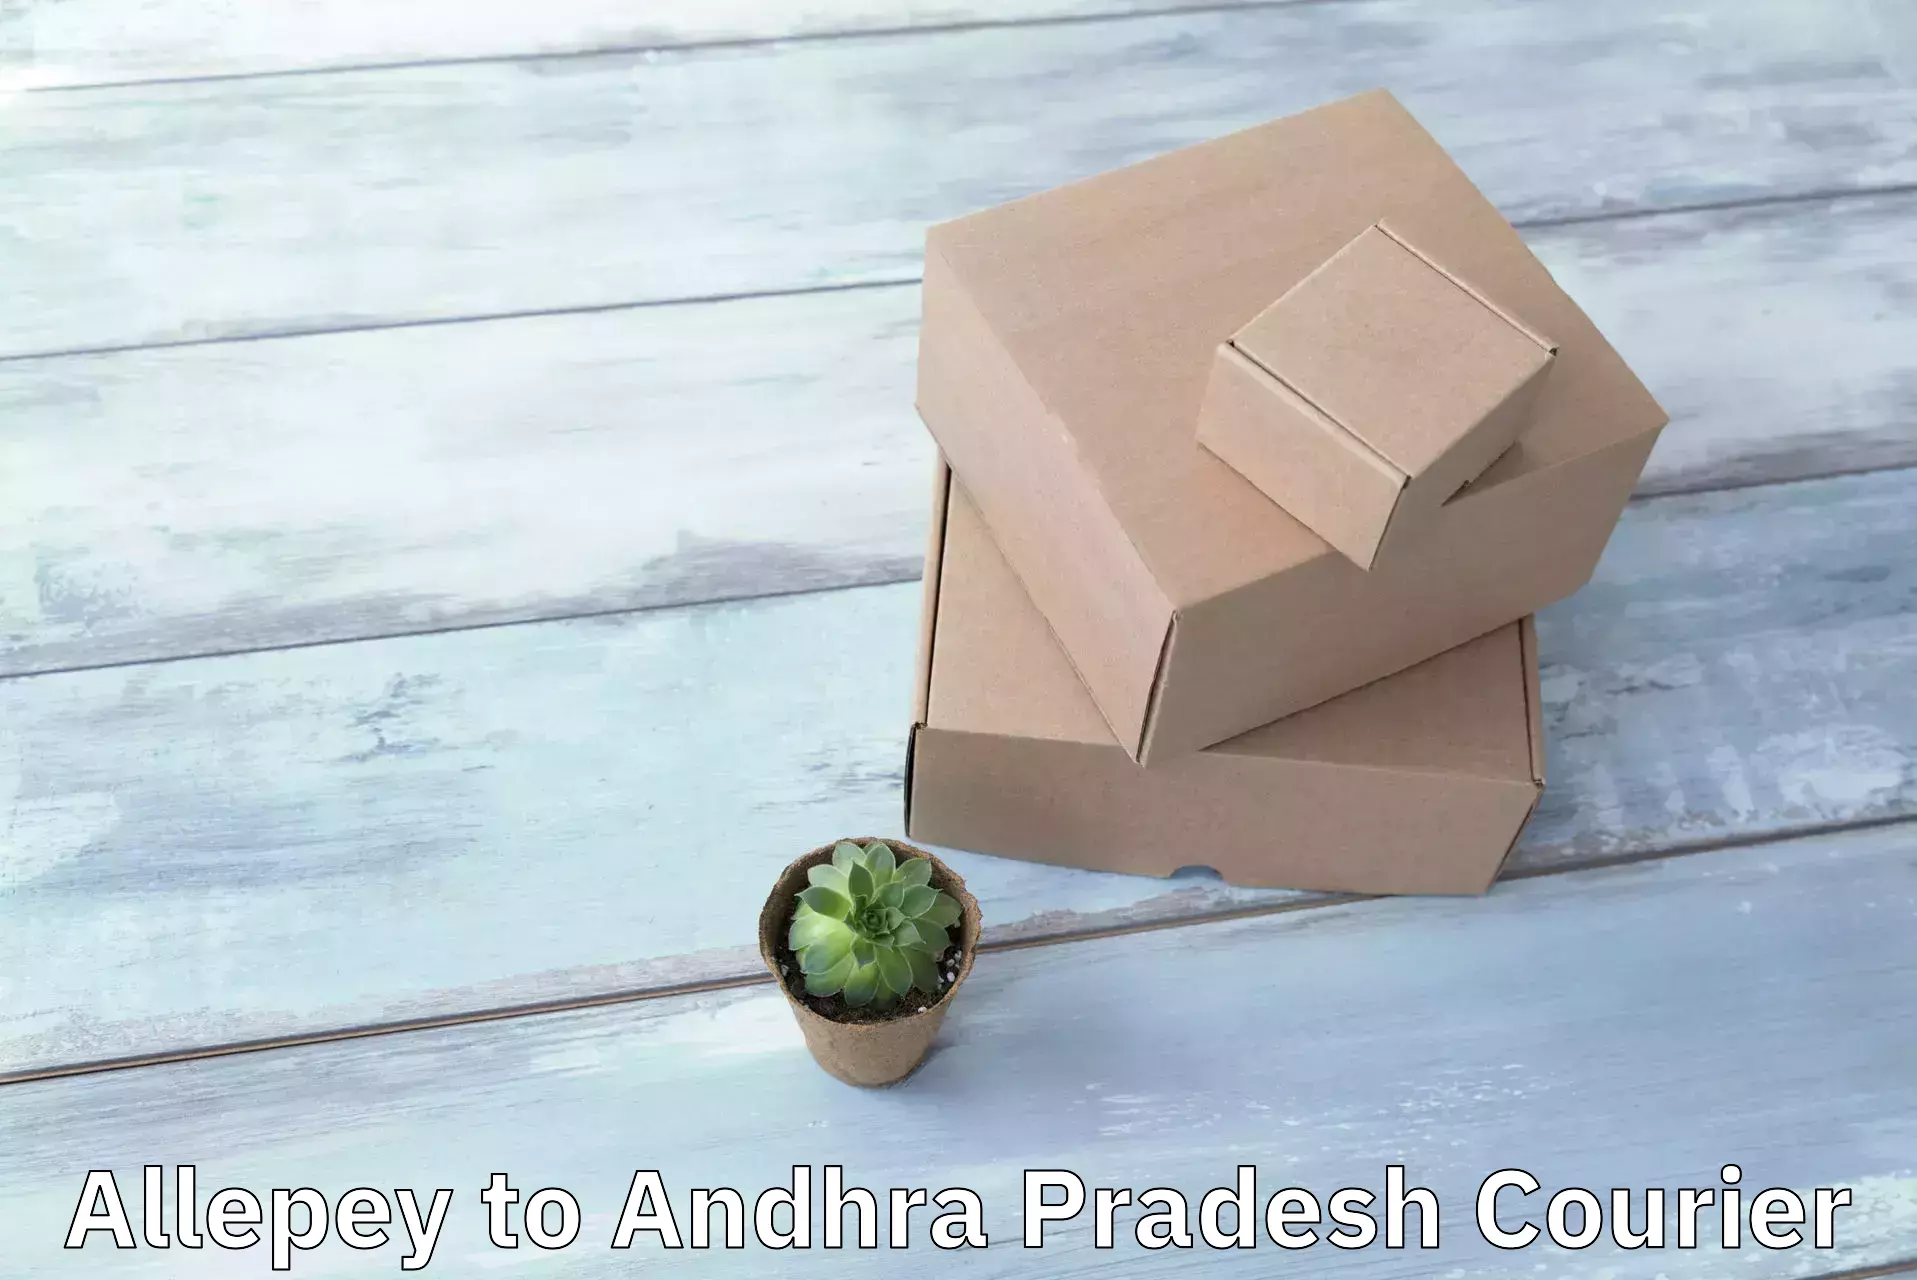 Smart shipping technology Allepey to Andhra Pradesh